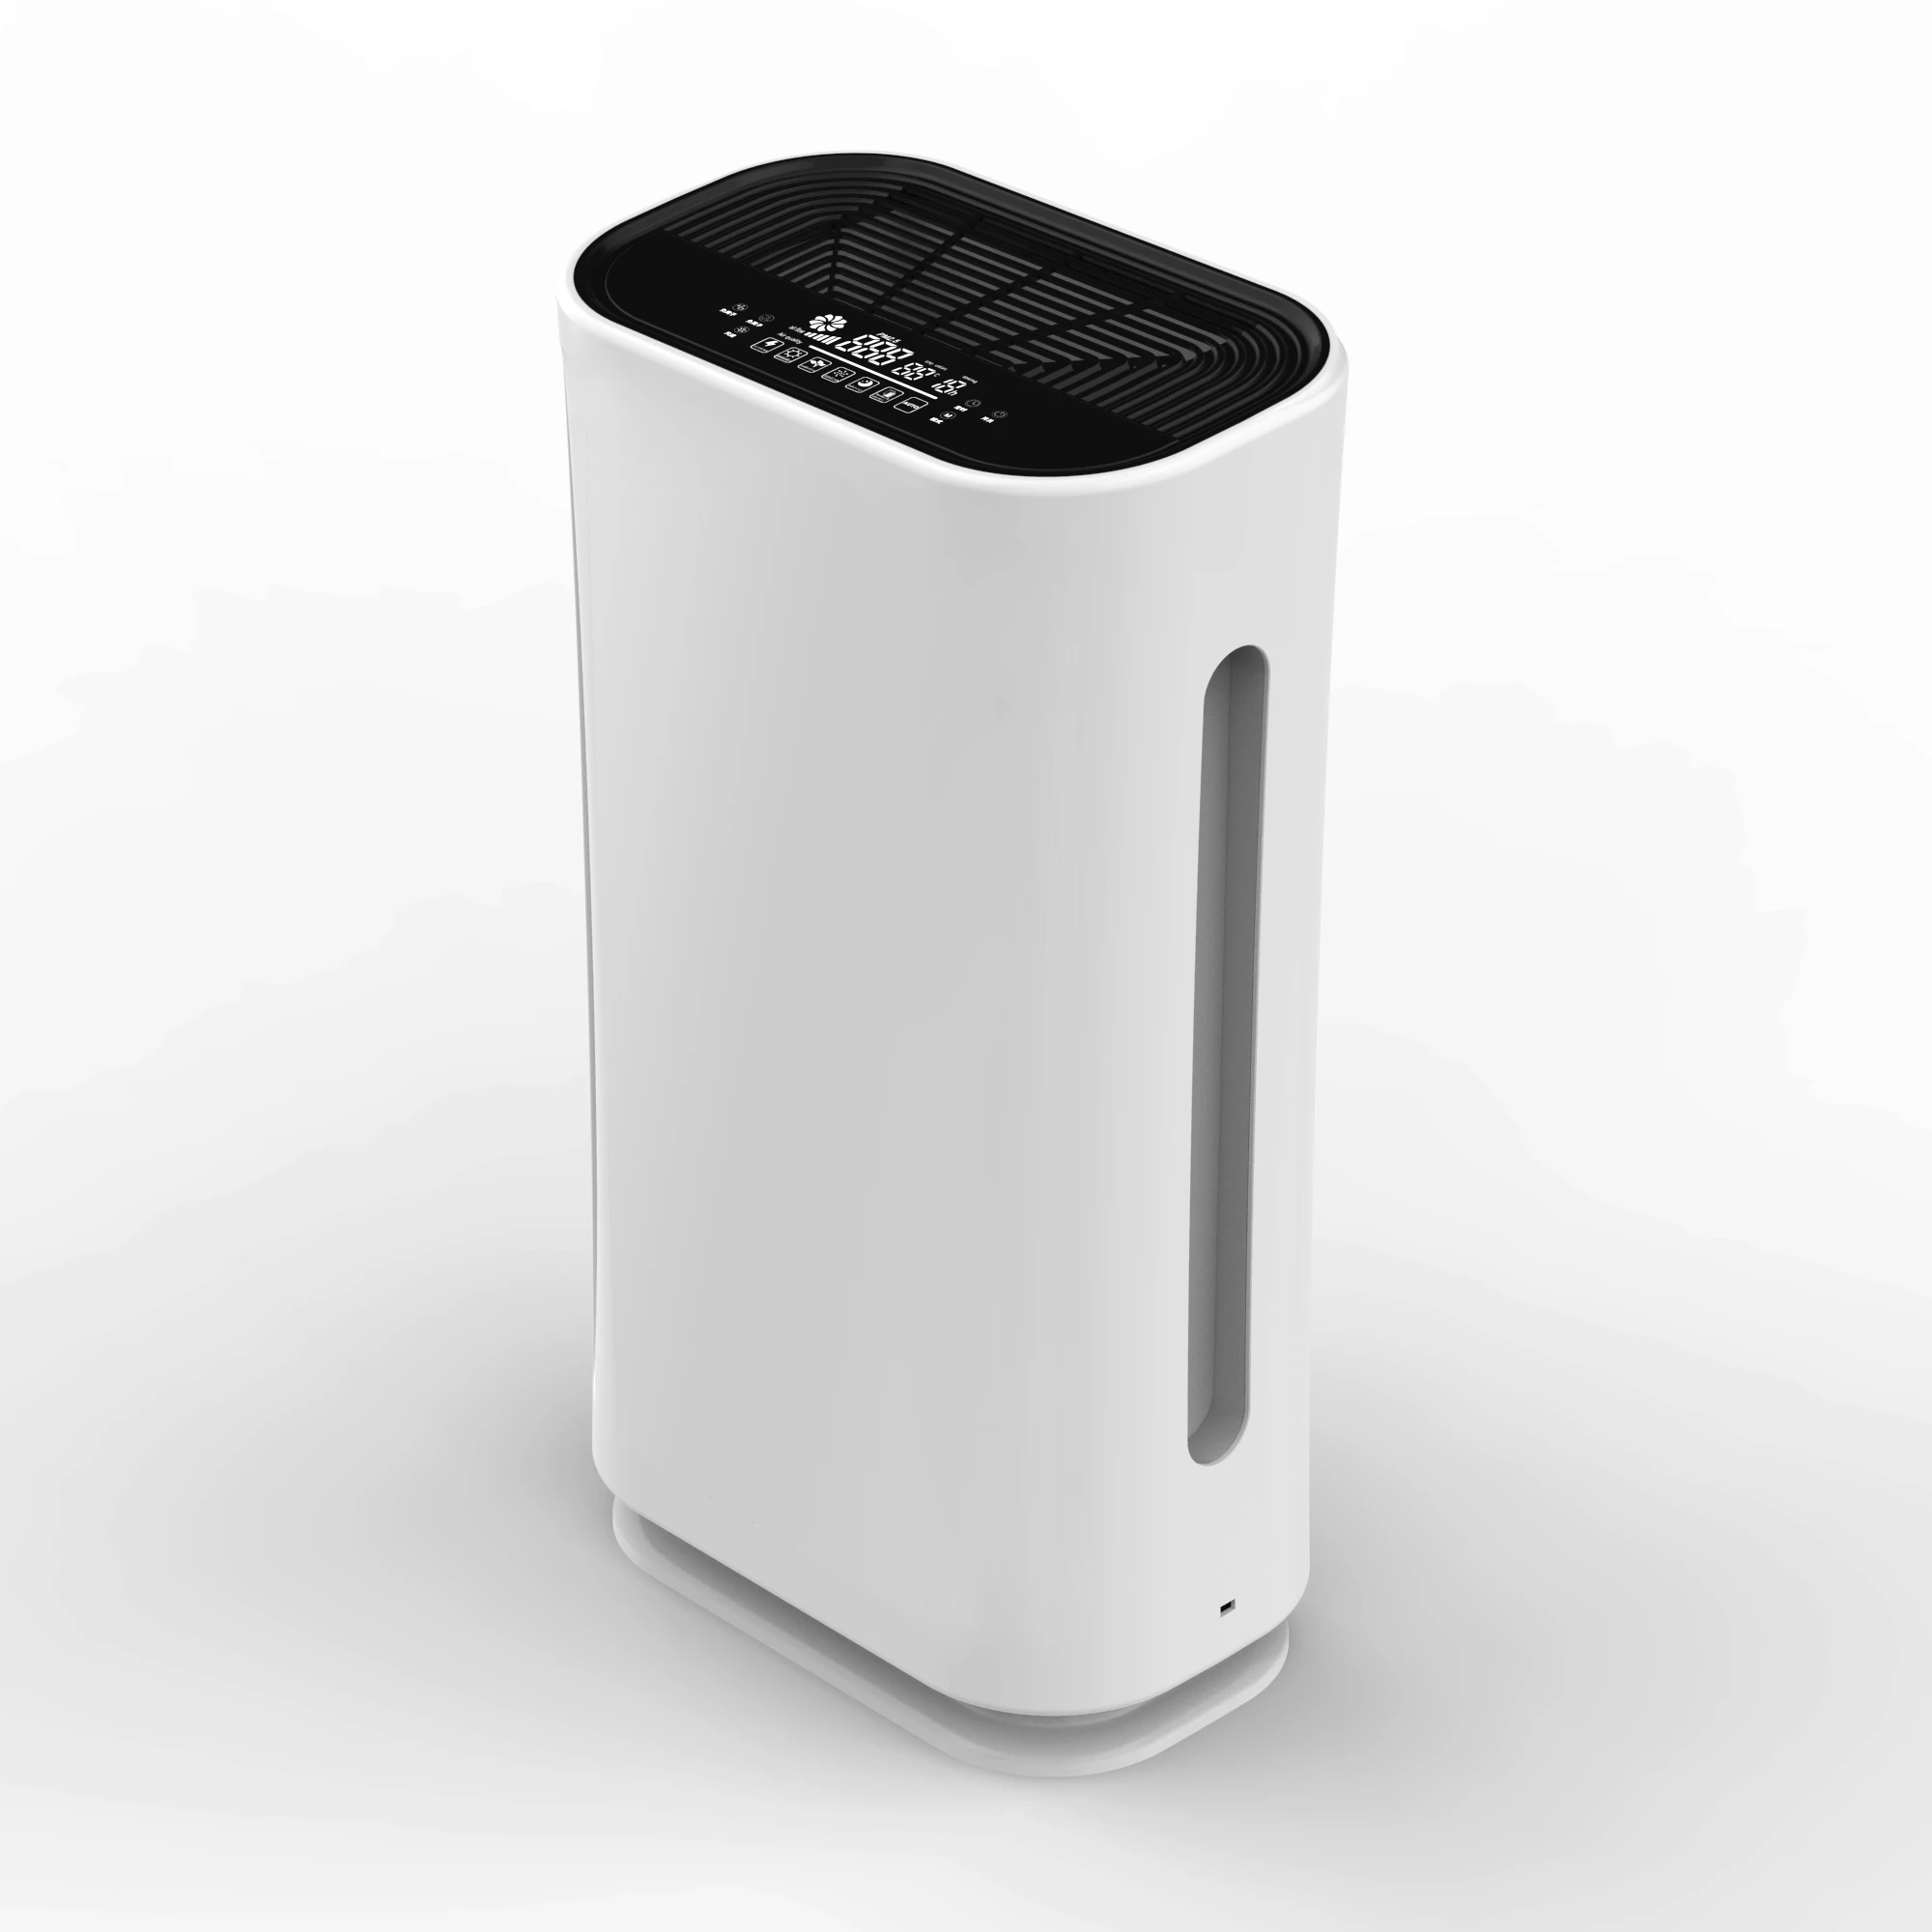 

Home Technology Wifi Air Purifier For Sale, White or oem